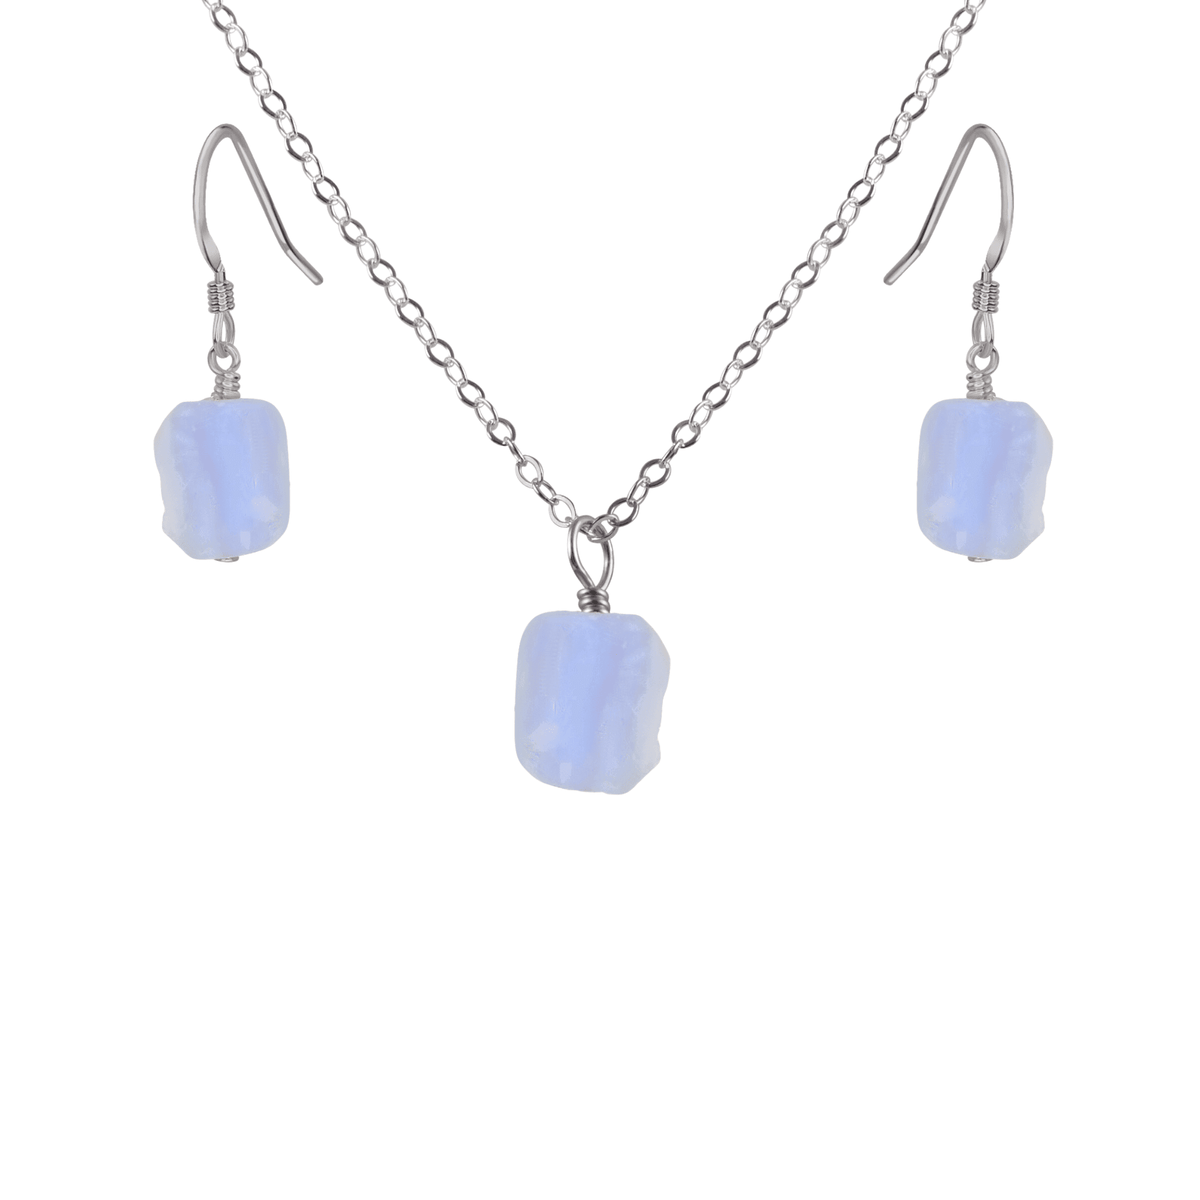 Raw Blue Lace Agate Crystal Earrings & Necklace Set - Raw Blue Lace Agate Crystal Earrings & Necklace Set - Stainless Steel - Luna Tide Handmade Crystal Jewellery